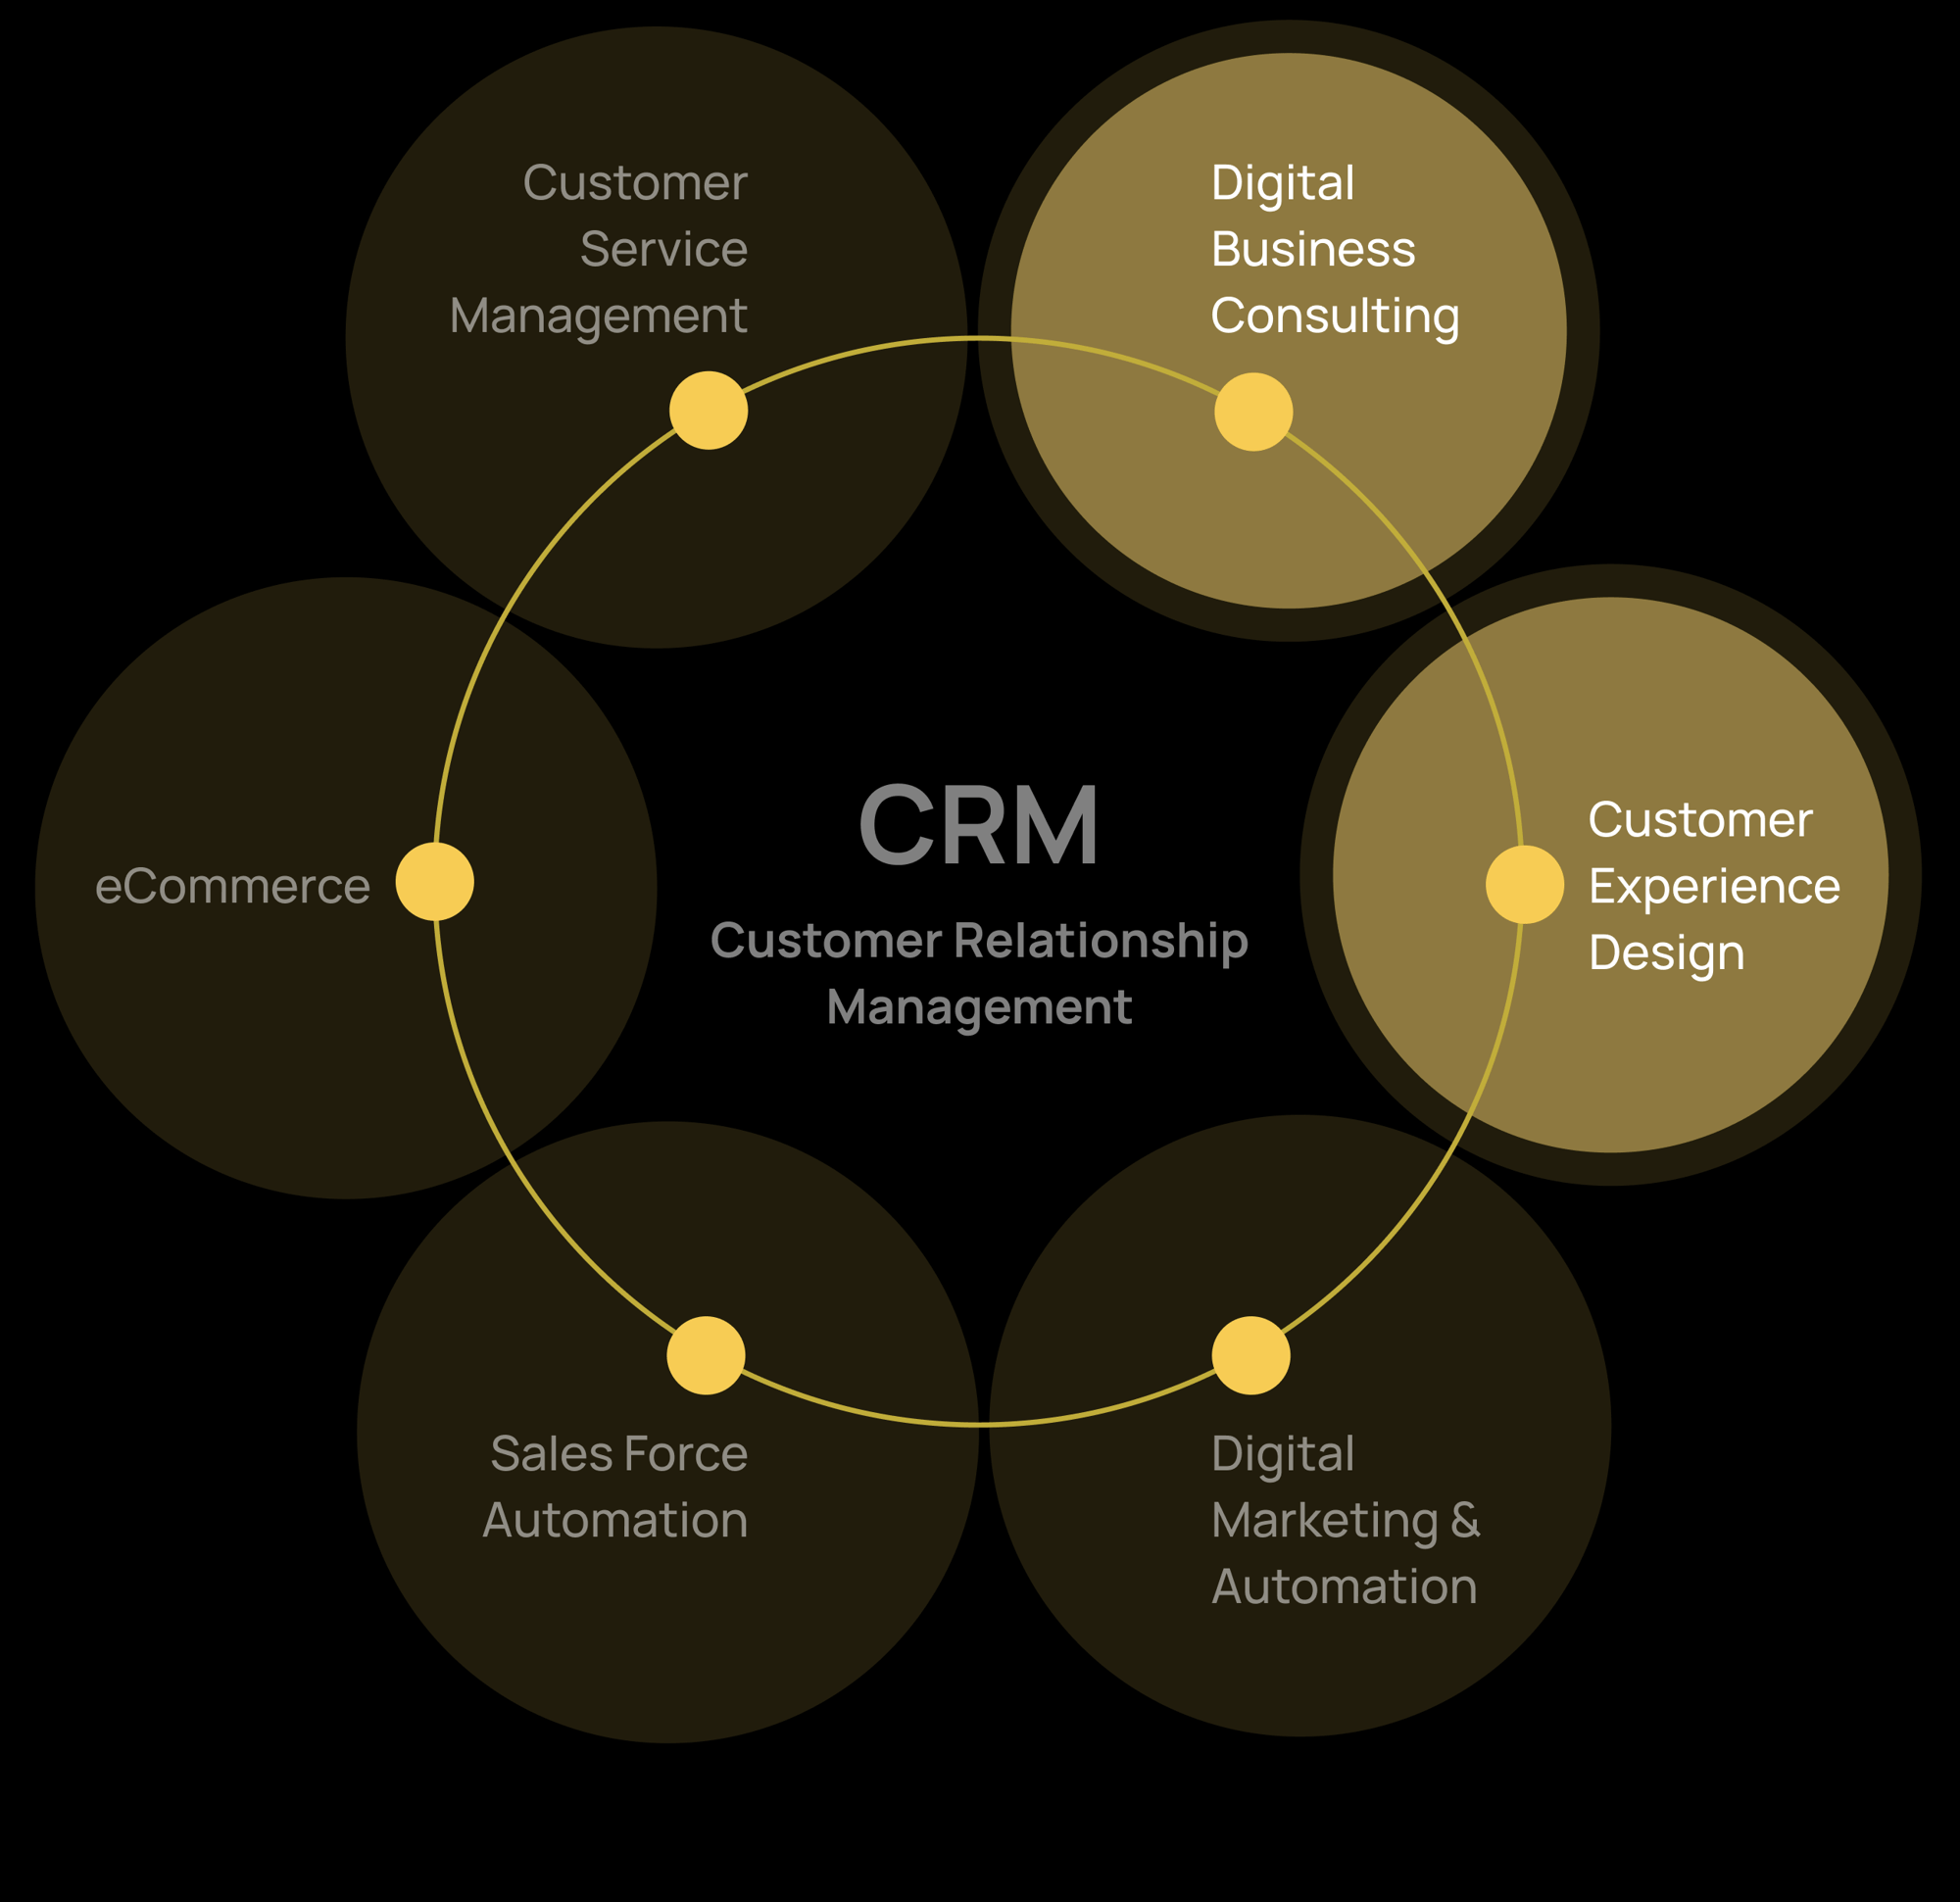 Magic Circle: Digital Business Consulting & Customer Experience Design